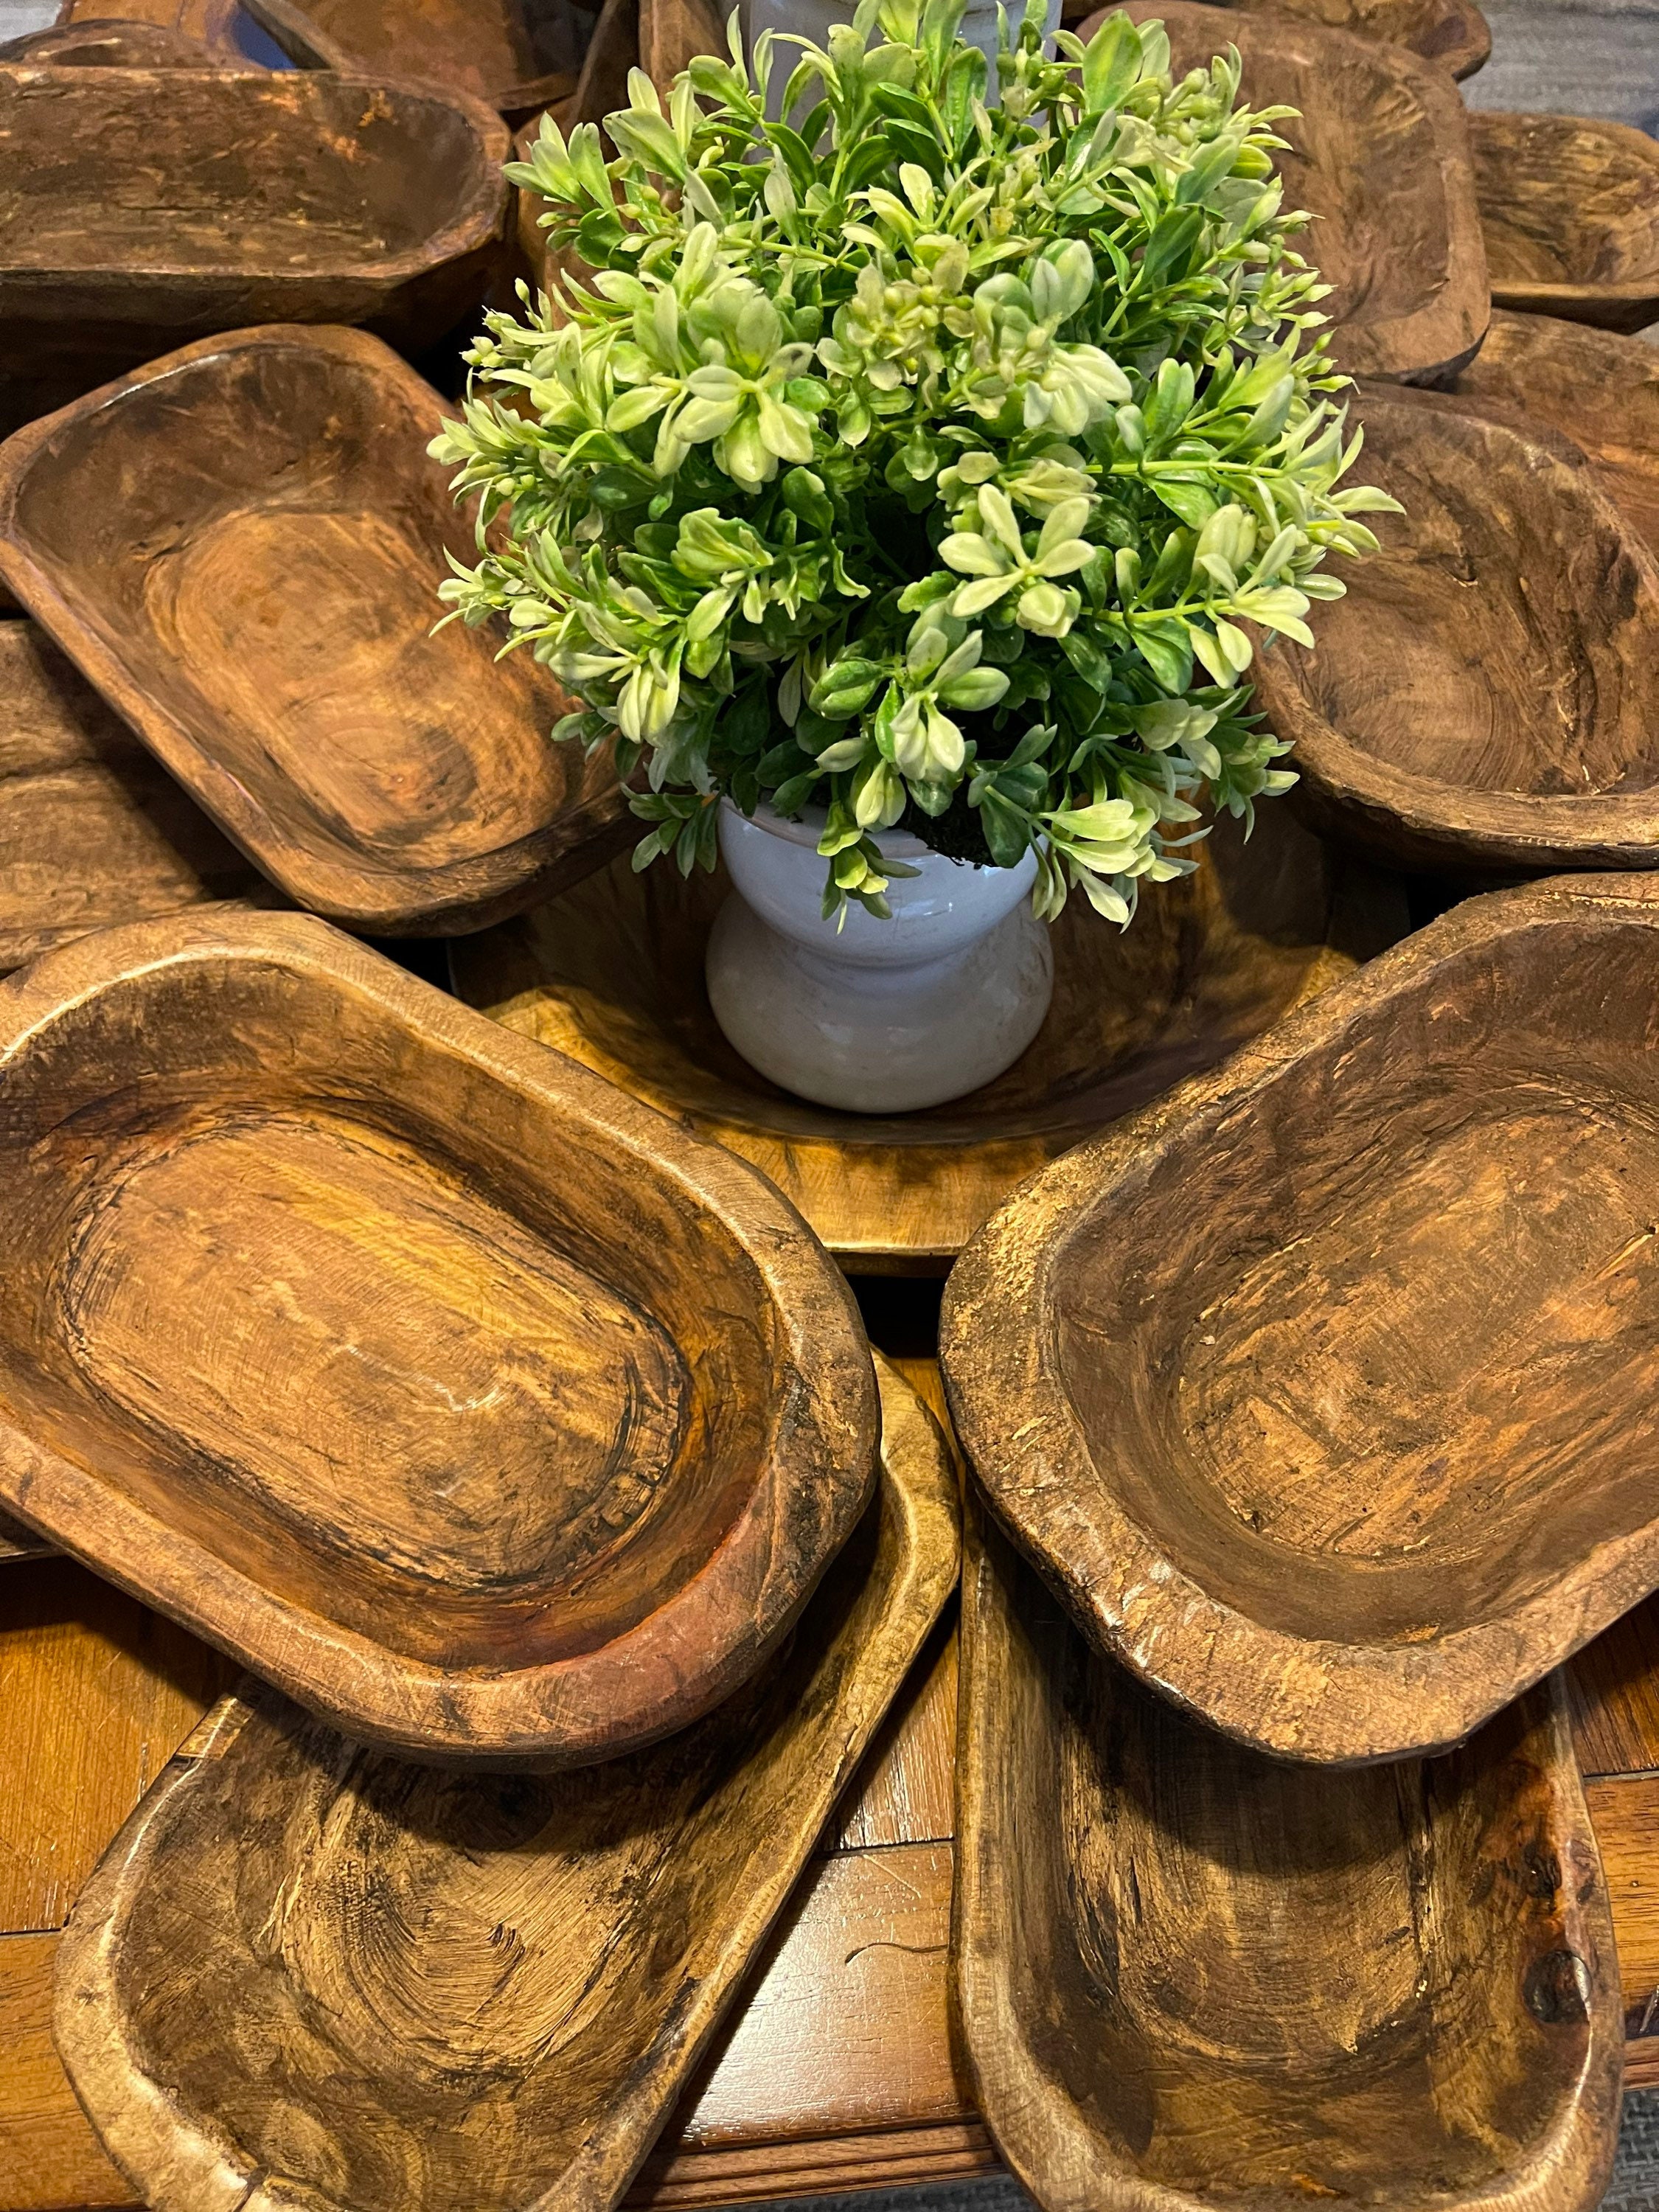 Wooden Dough Bowl - 10 x 6 - Wood Bowl Decor - Spanish Oak - Rustic Home  Decoration Centerpiece - Ready for Candle Making - Bread Bowls - Handmade 